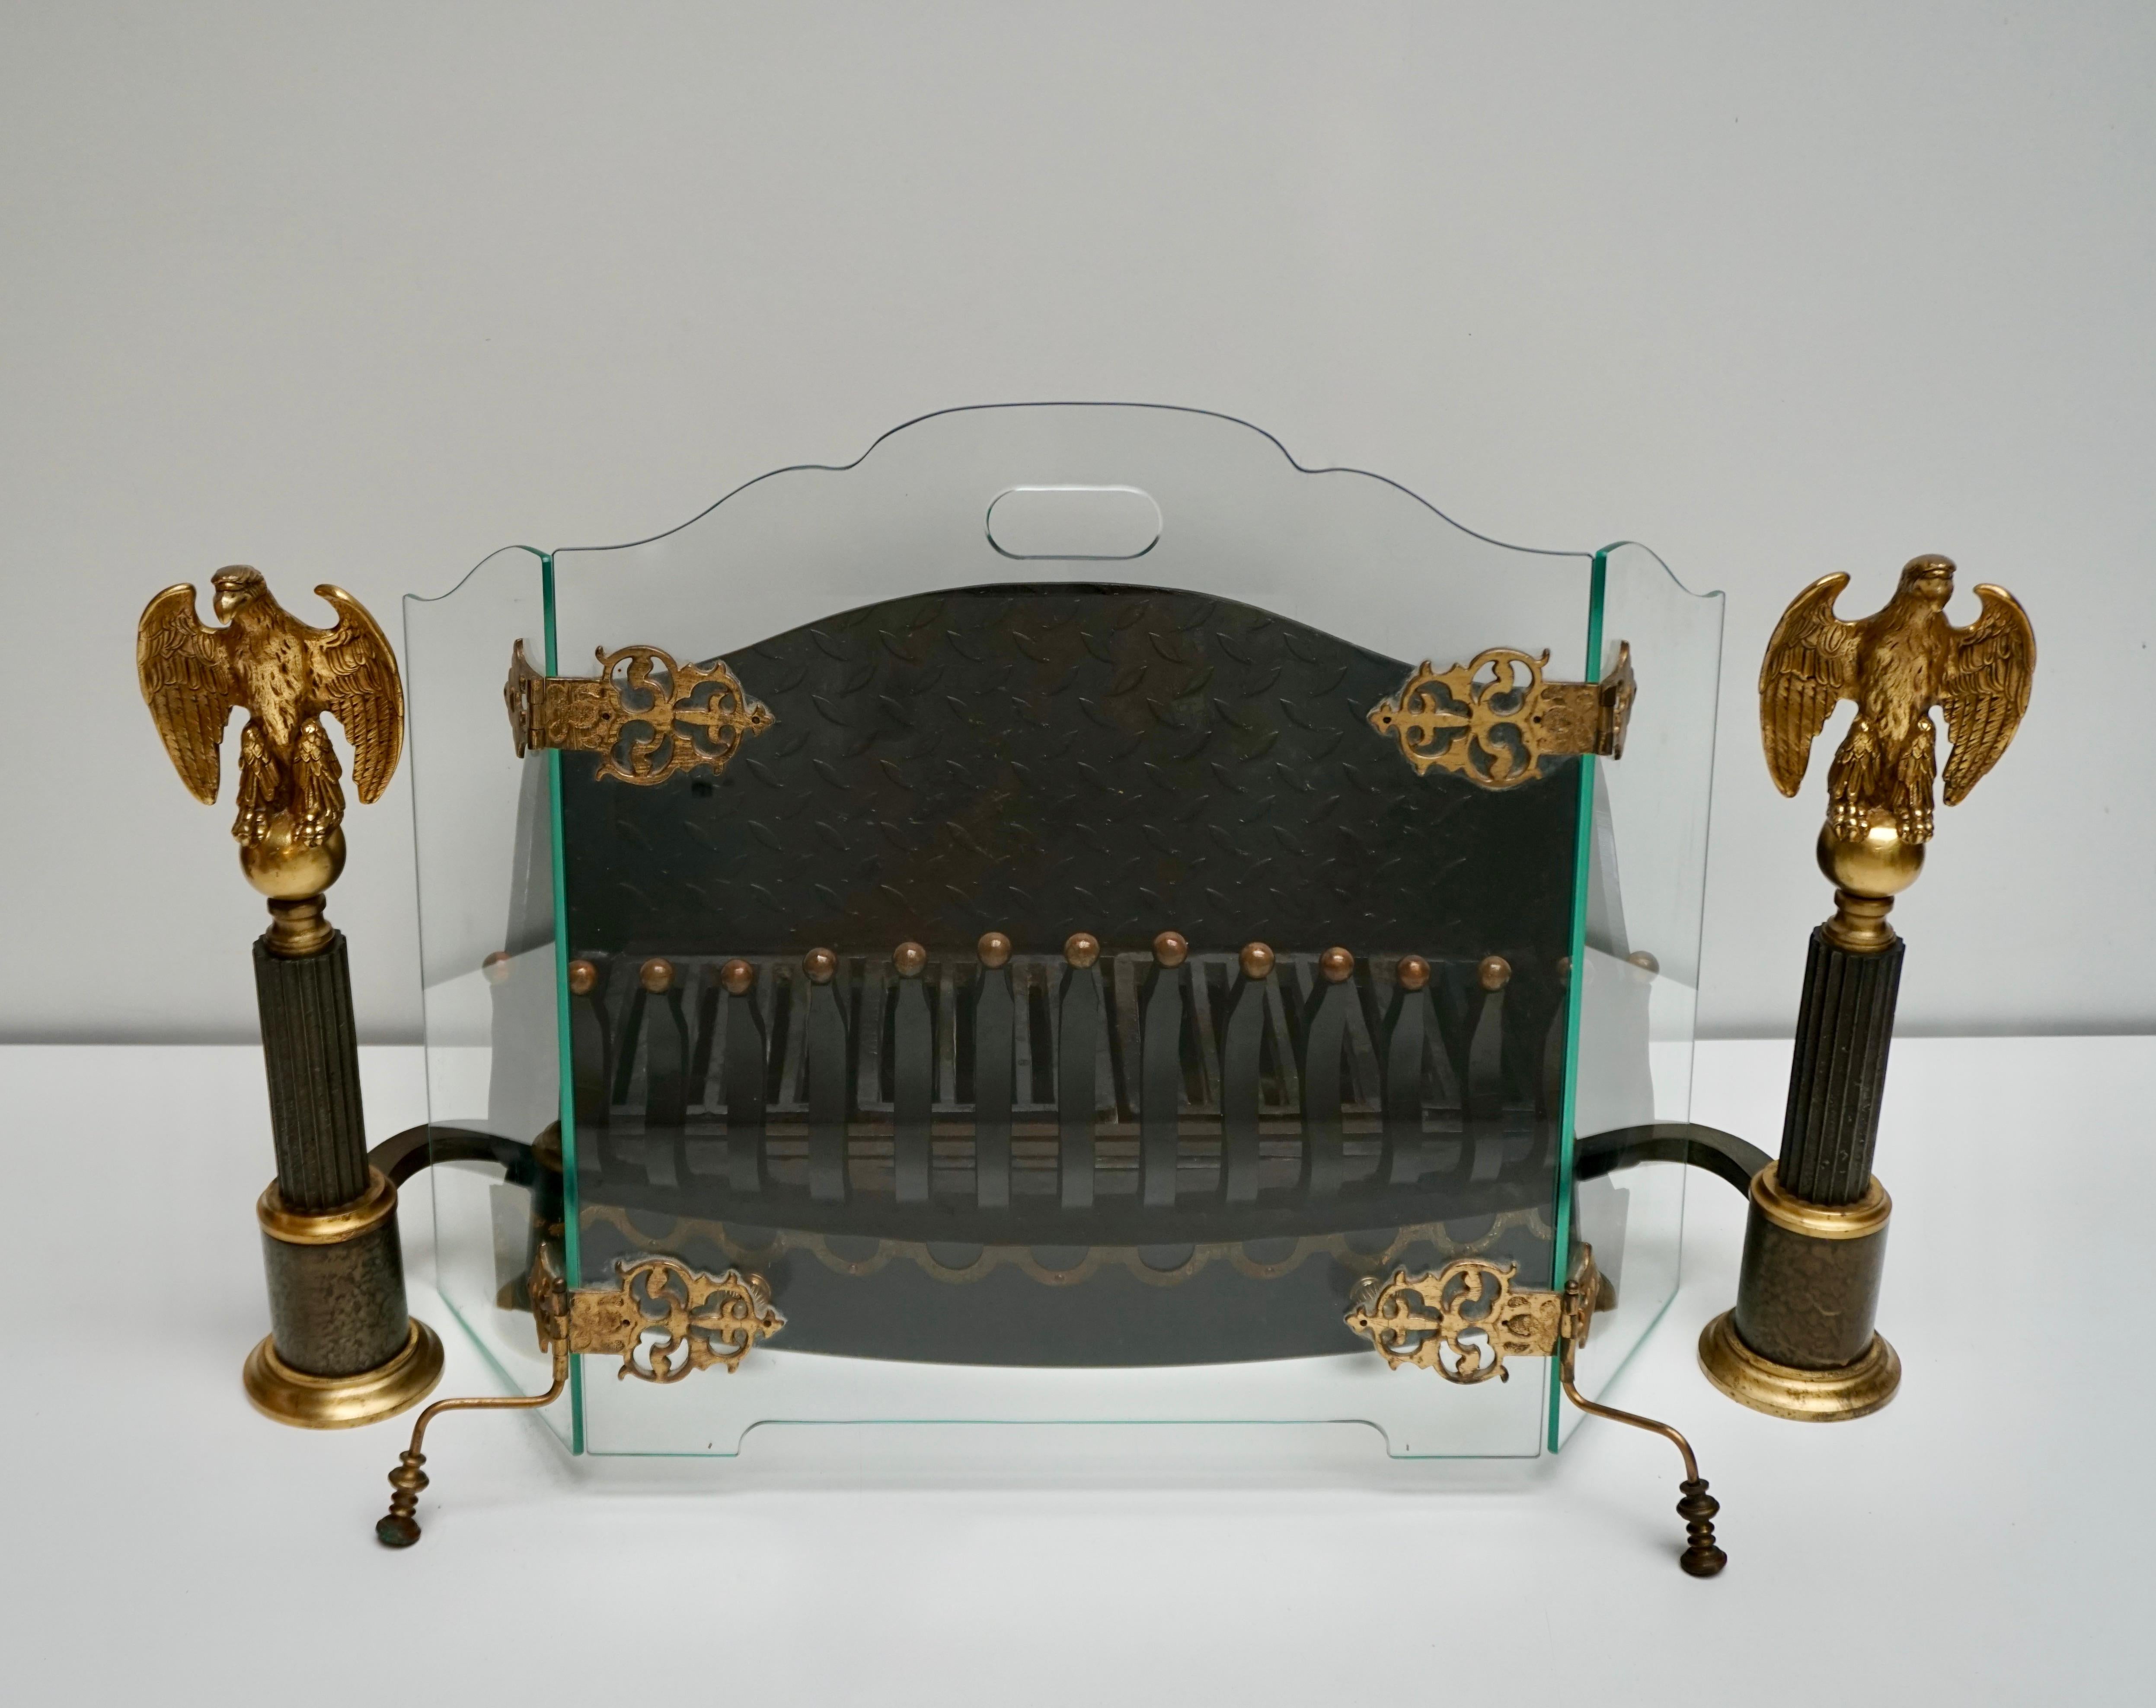 An incredible fire screen of functional art made of green edge glass with brass hinges and feet,
circa 1900-1930.


The fire grate is not included in the price.